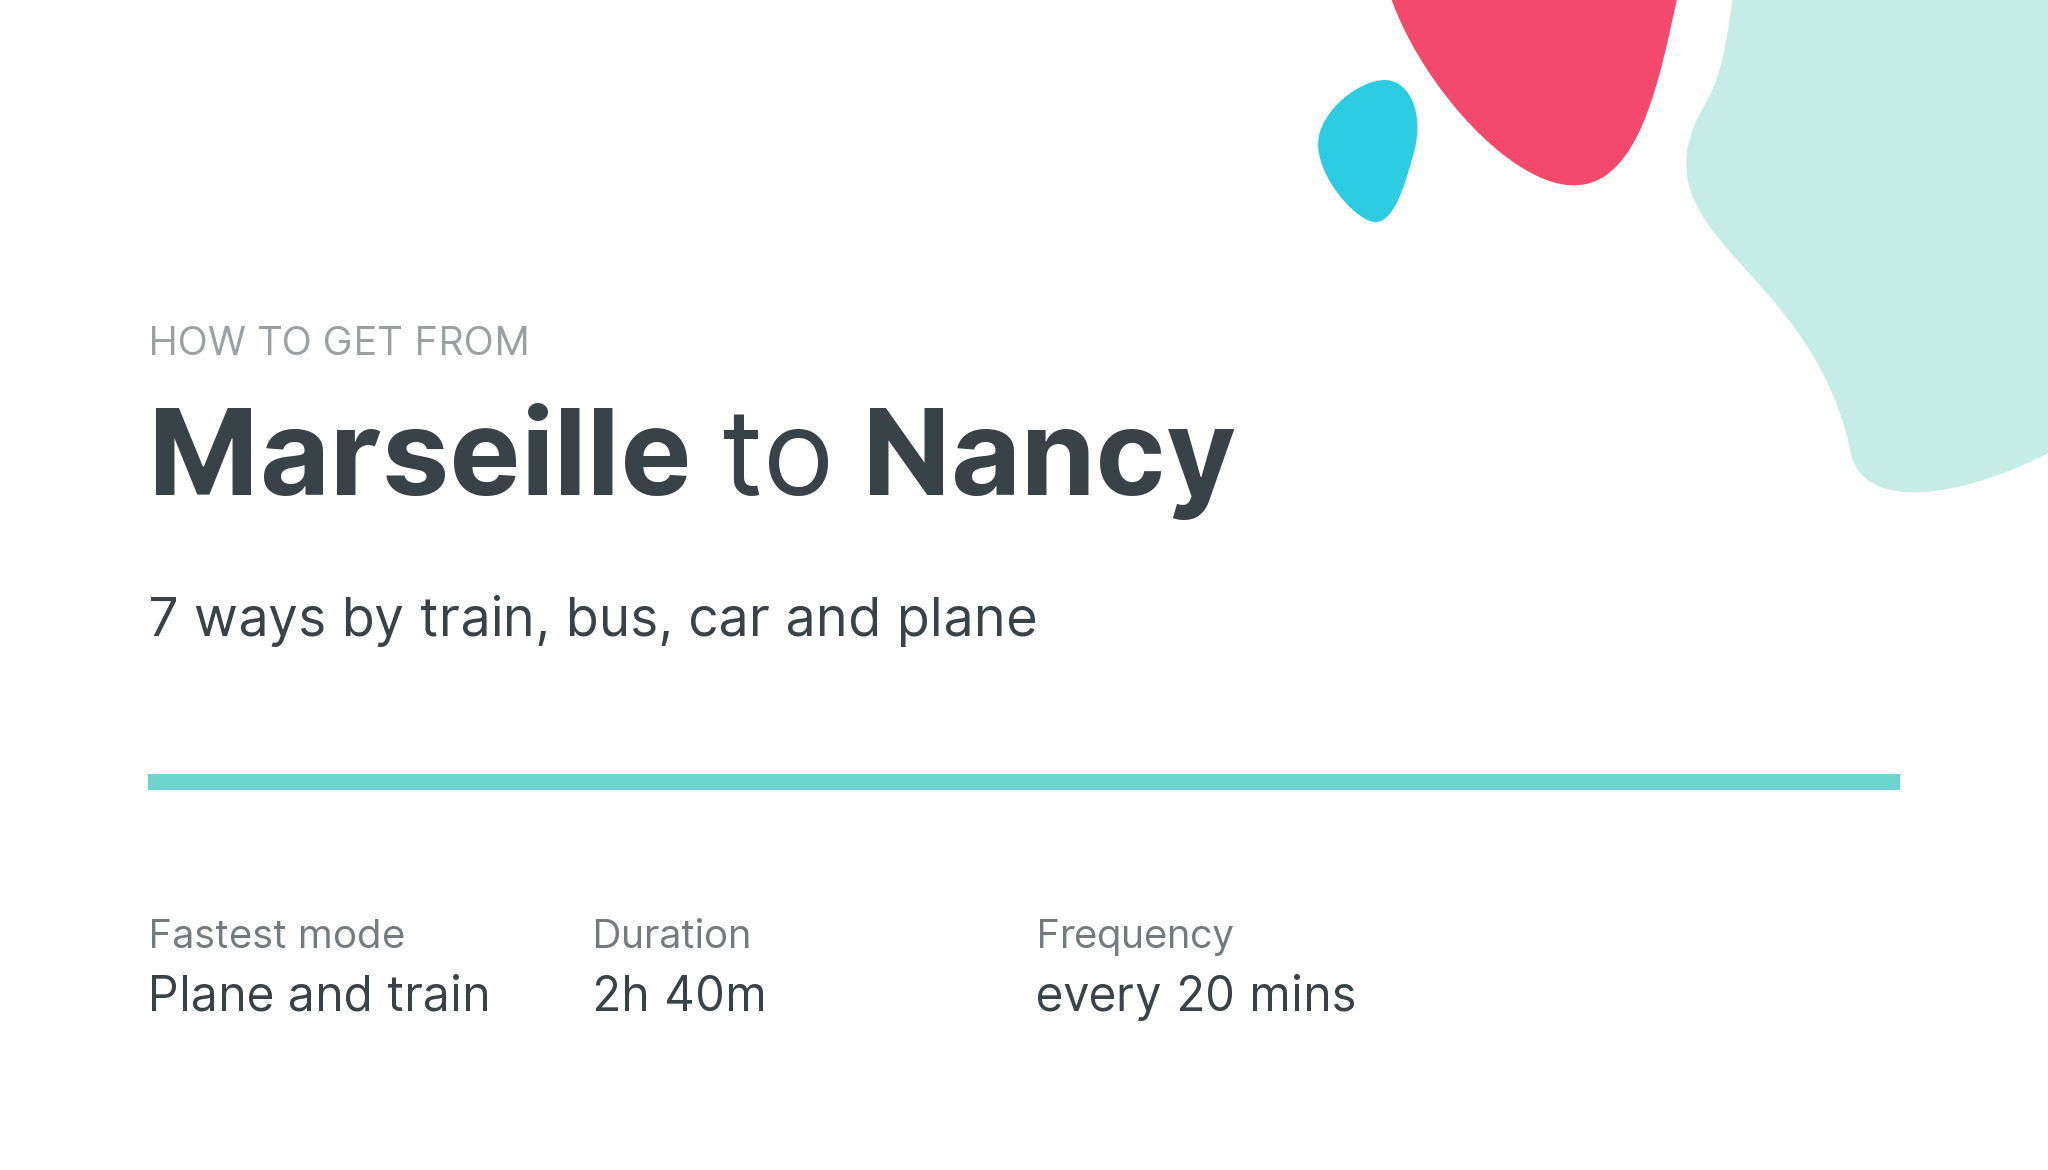 How do I get from Marseille to Nancy